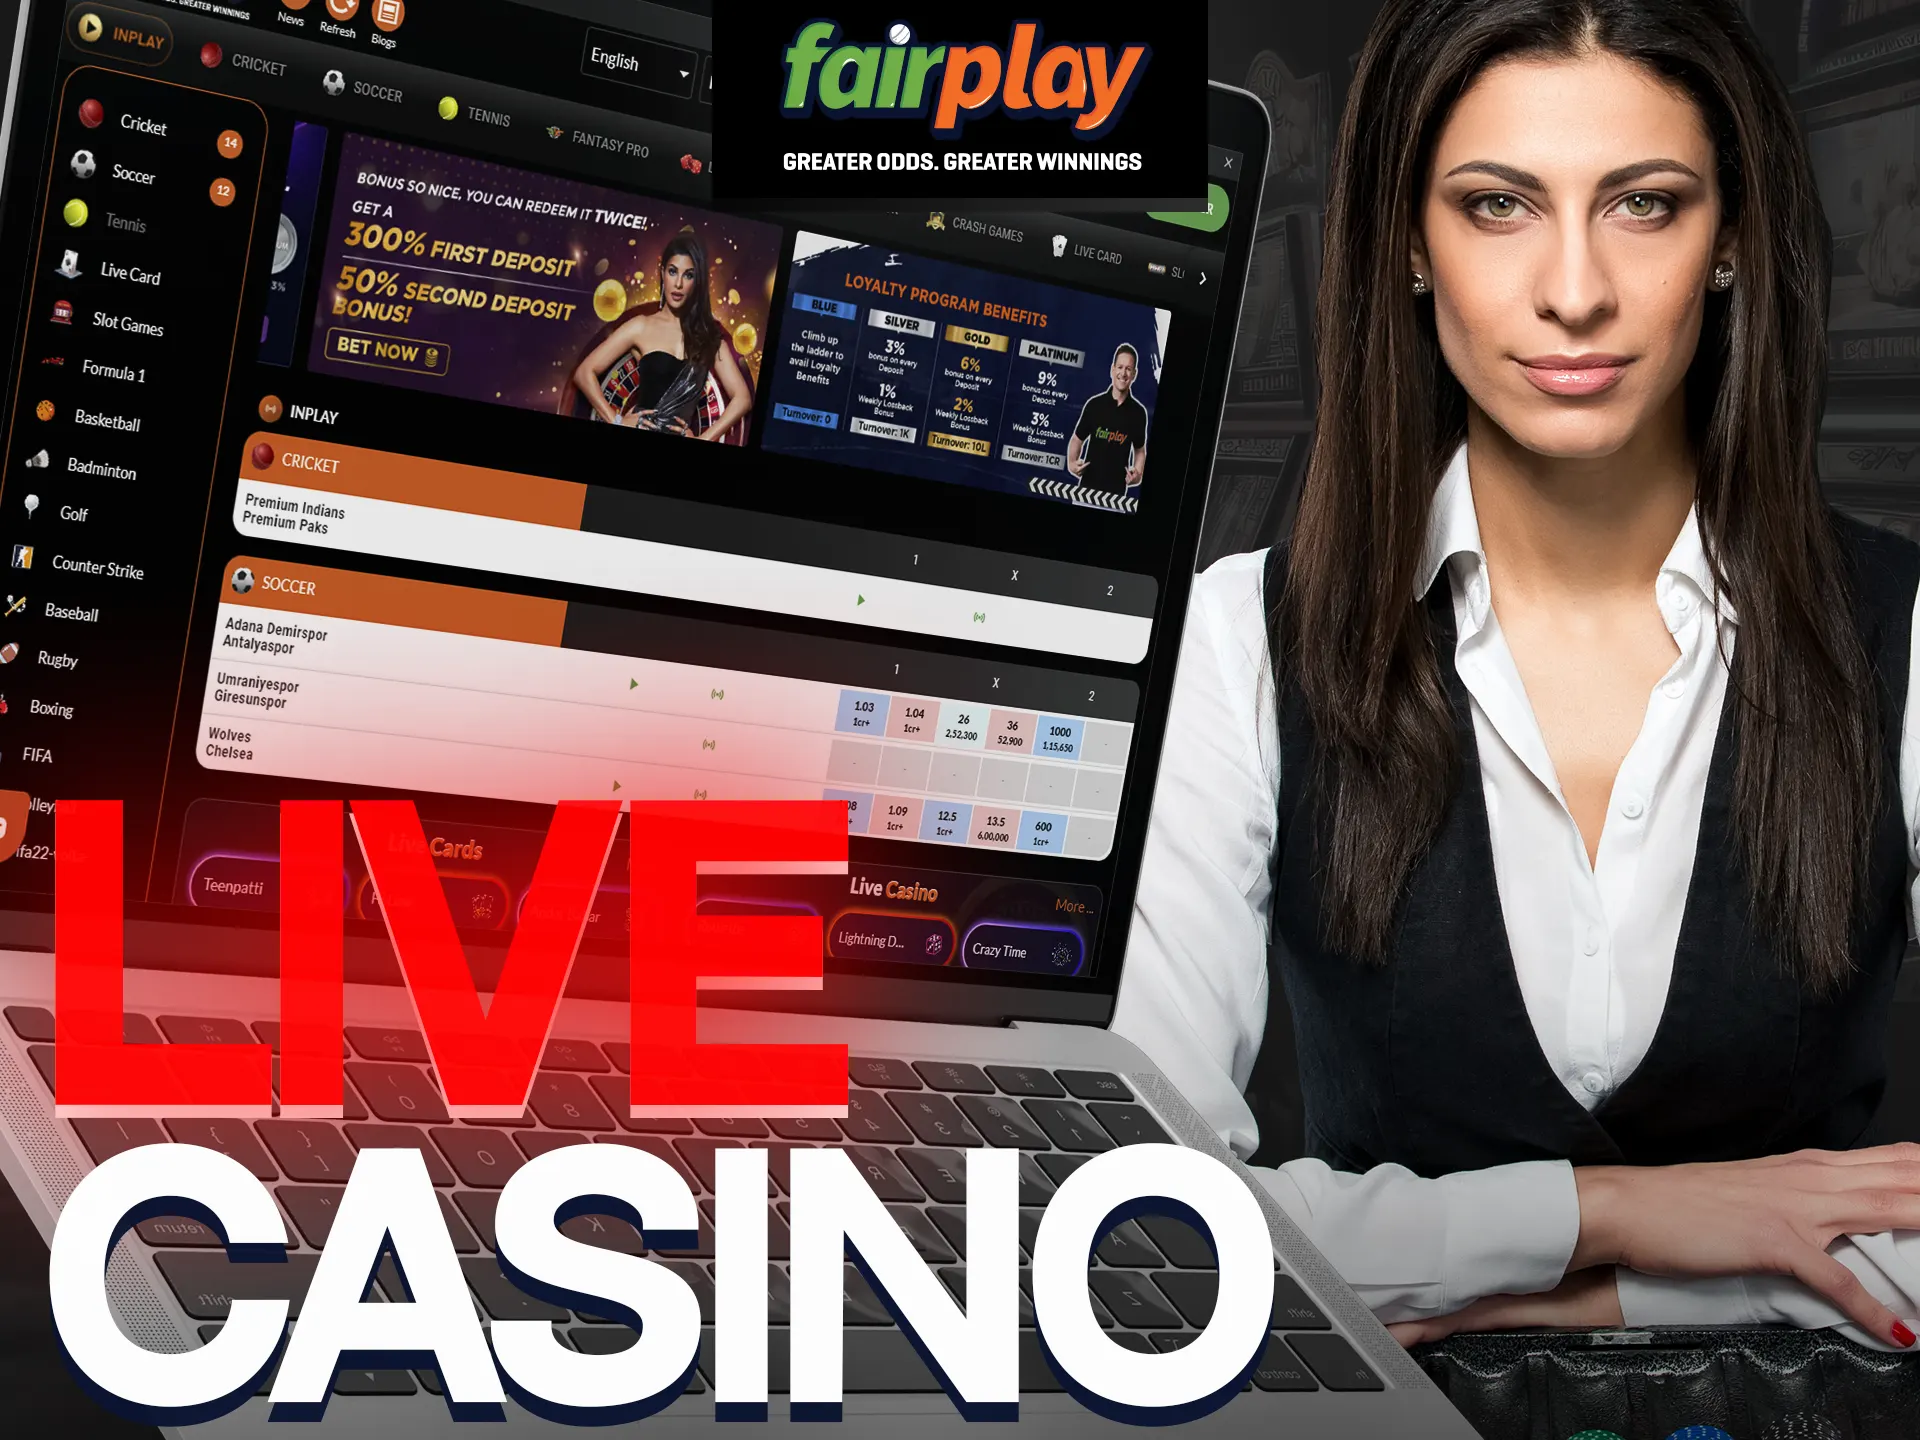 Play at Fairplay`s Live Casino section with the popular live dealer games.